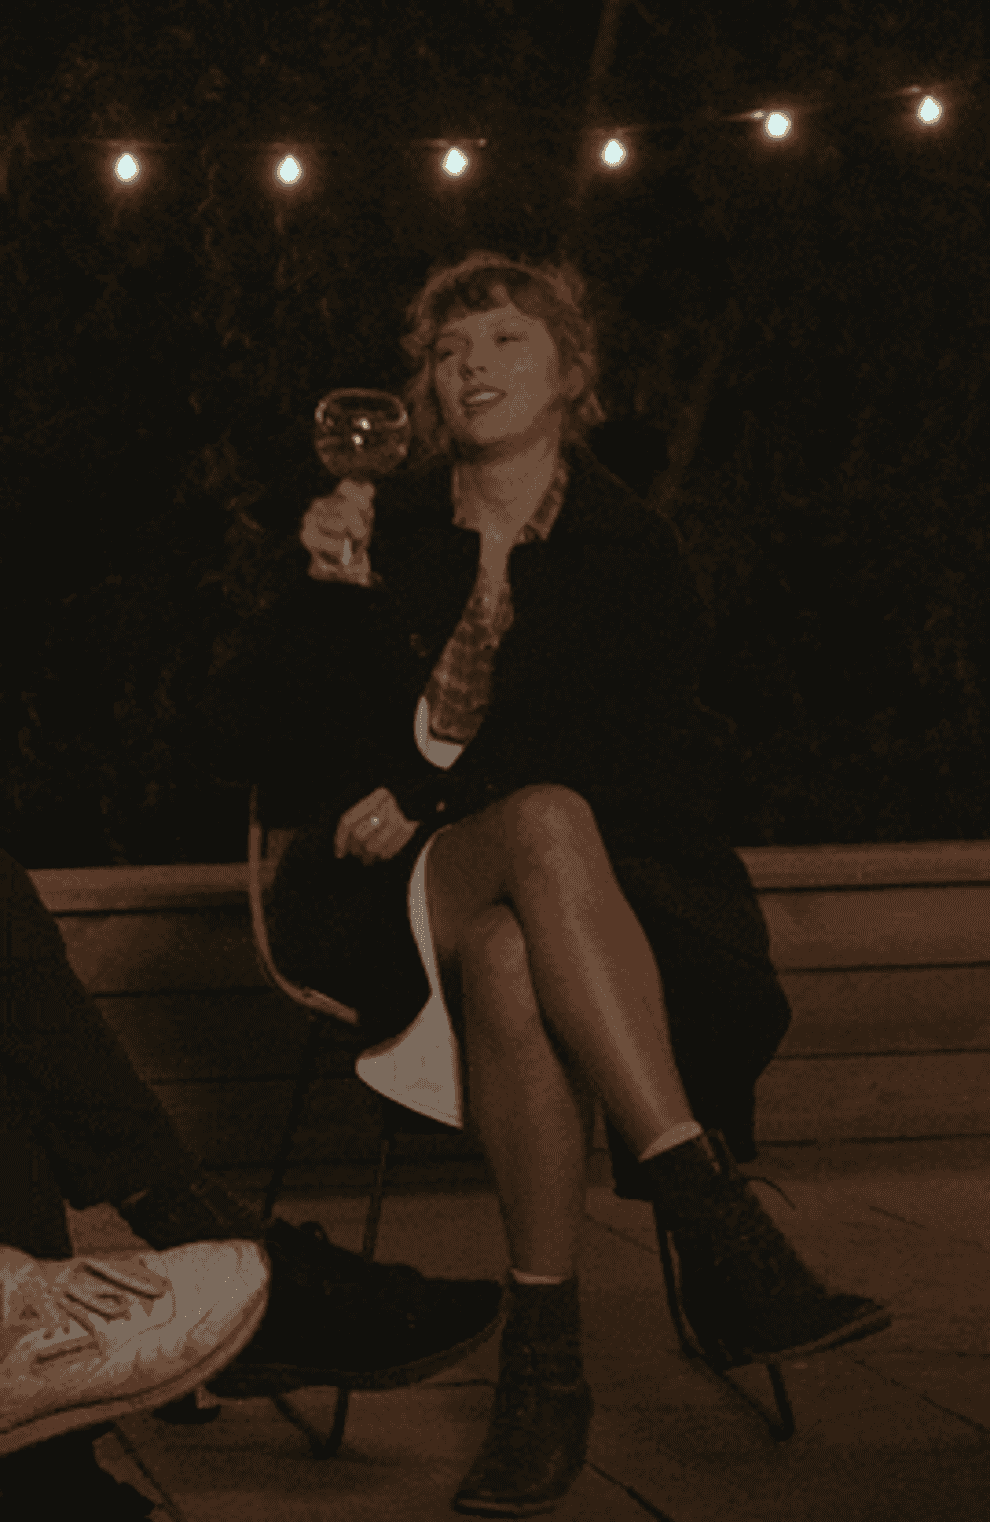 Taylor Swift sits with legs crossed and cheers&#x27; a glass of white wine.